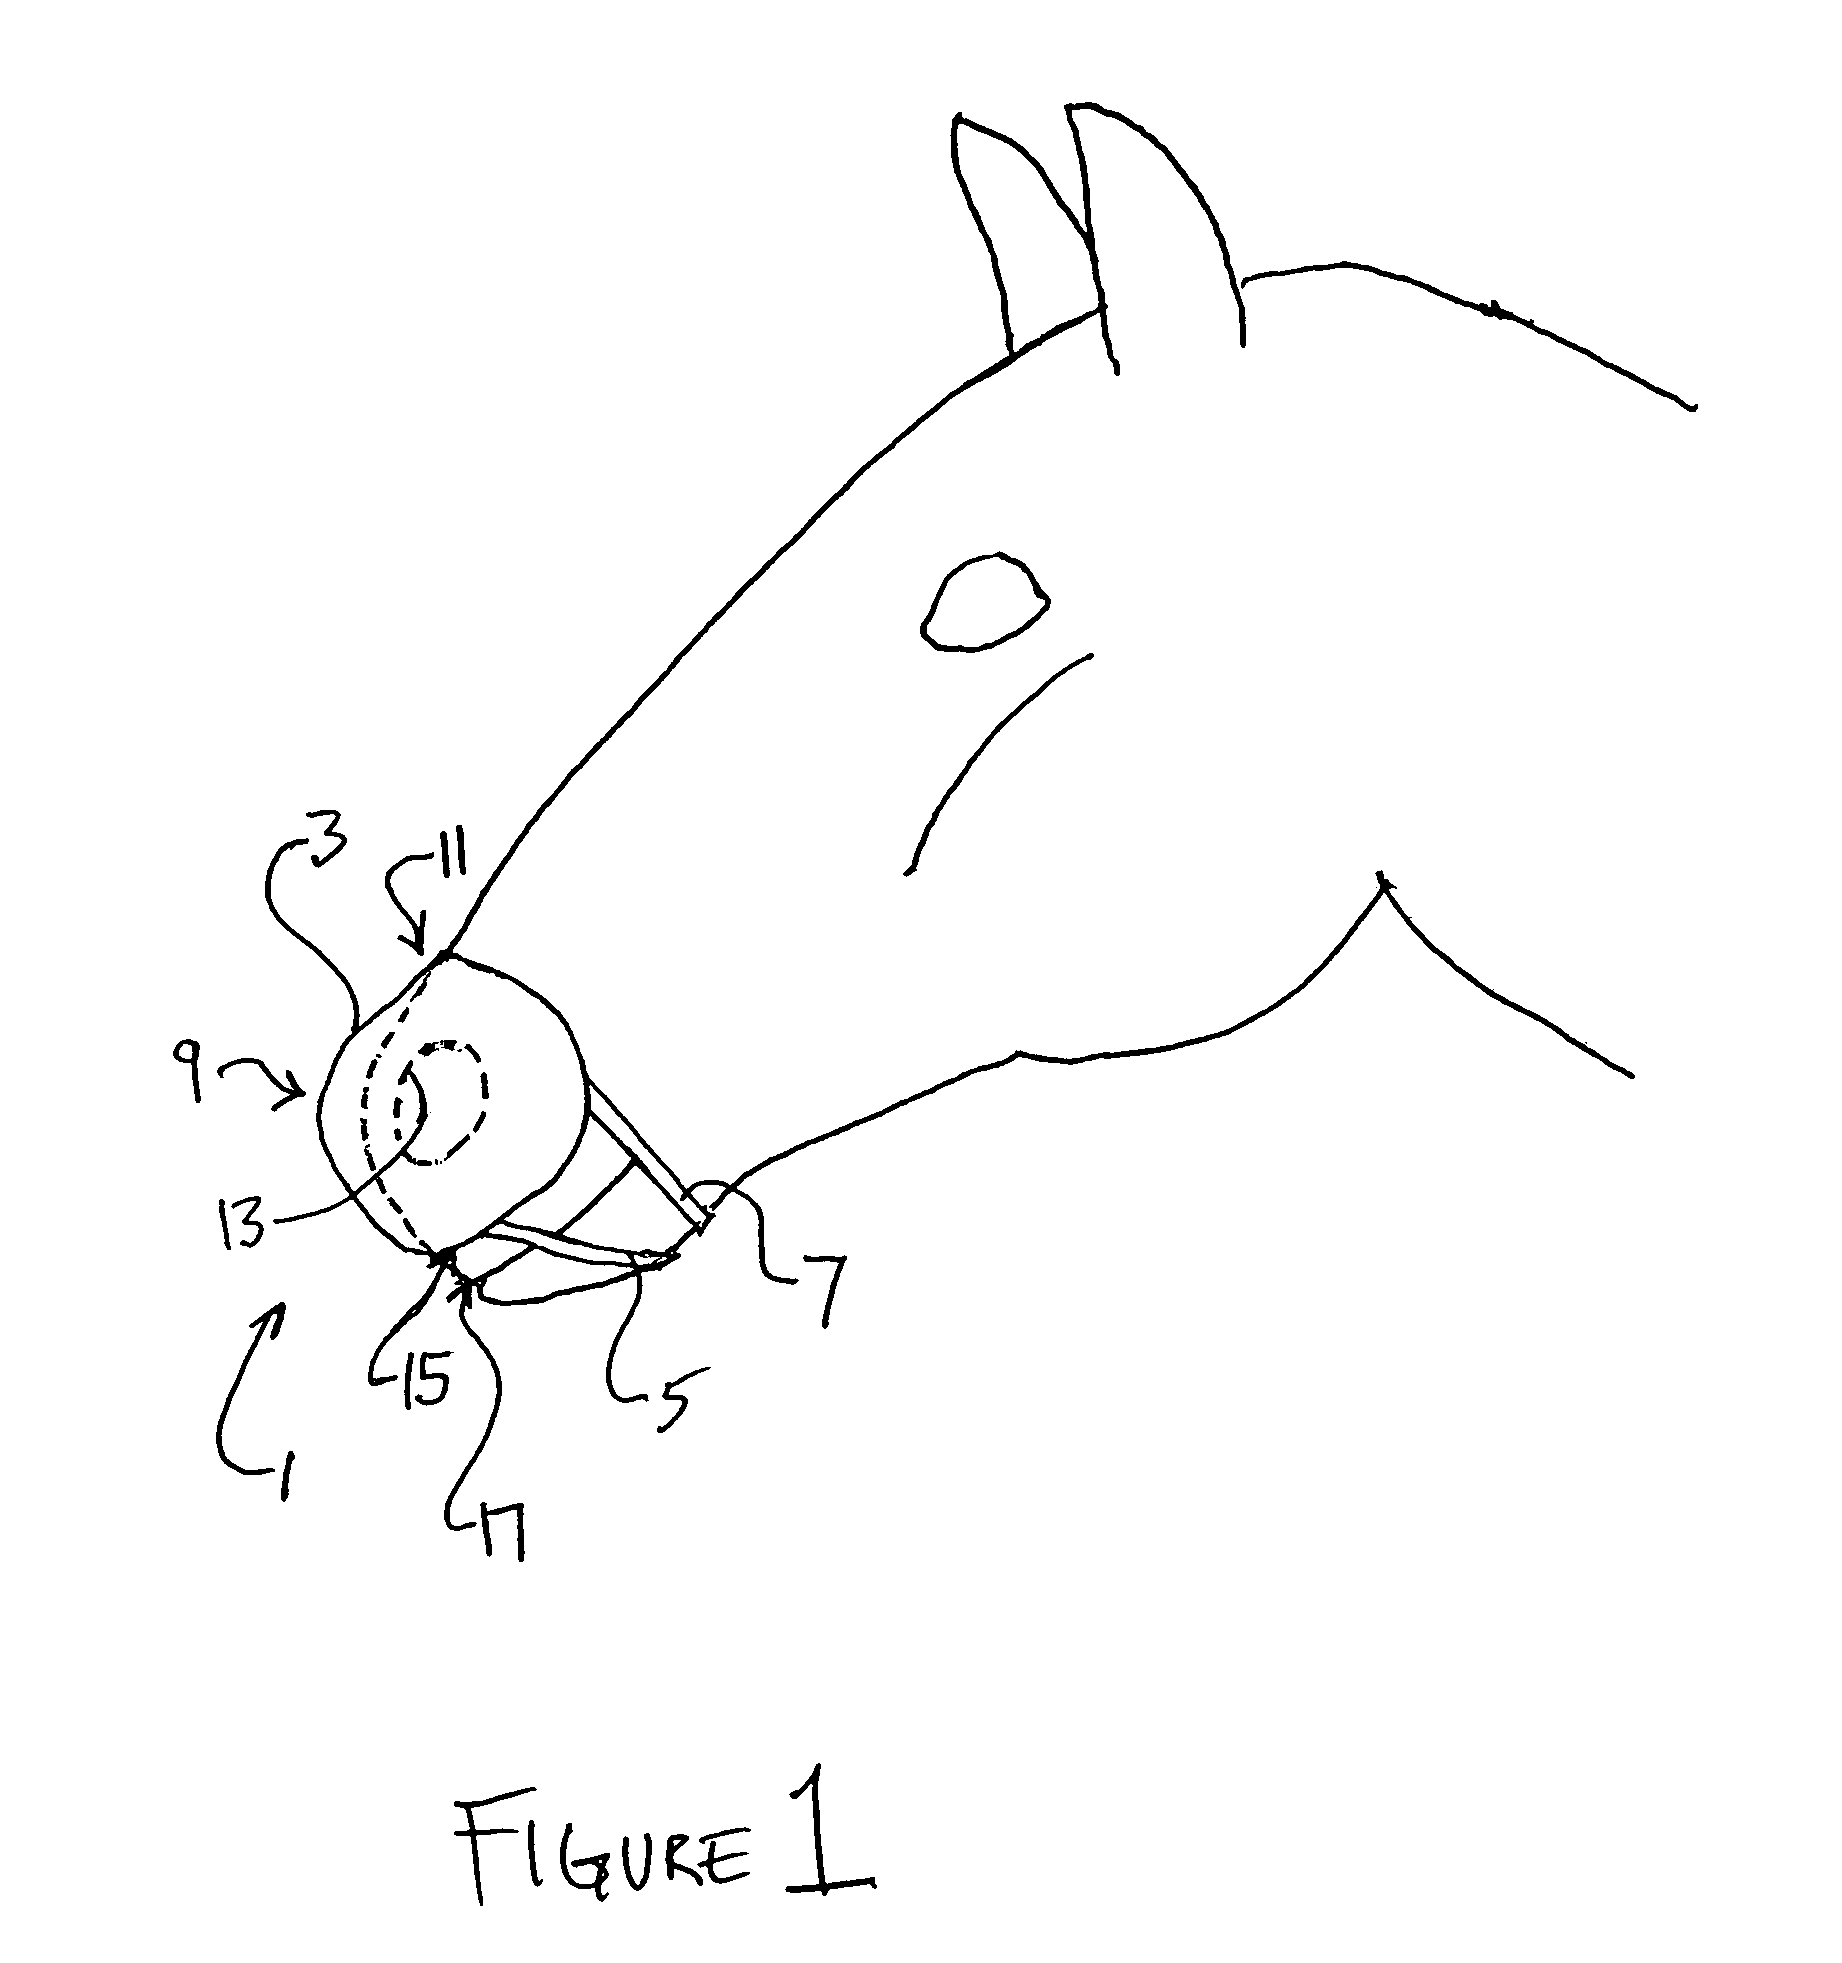 Method and apparatus for filtering air entering an animal's nostrils